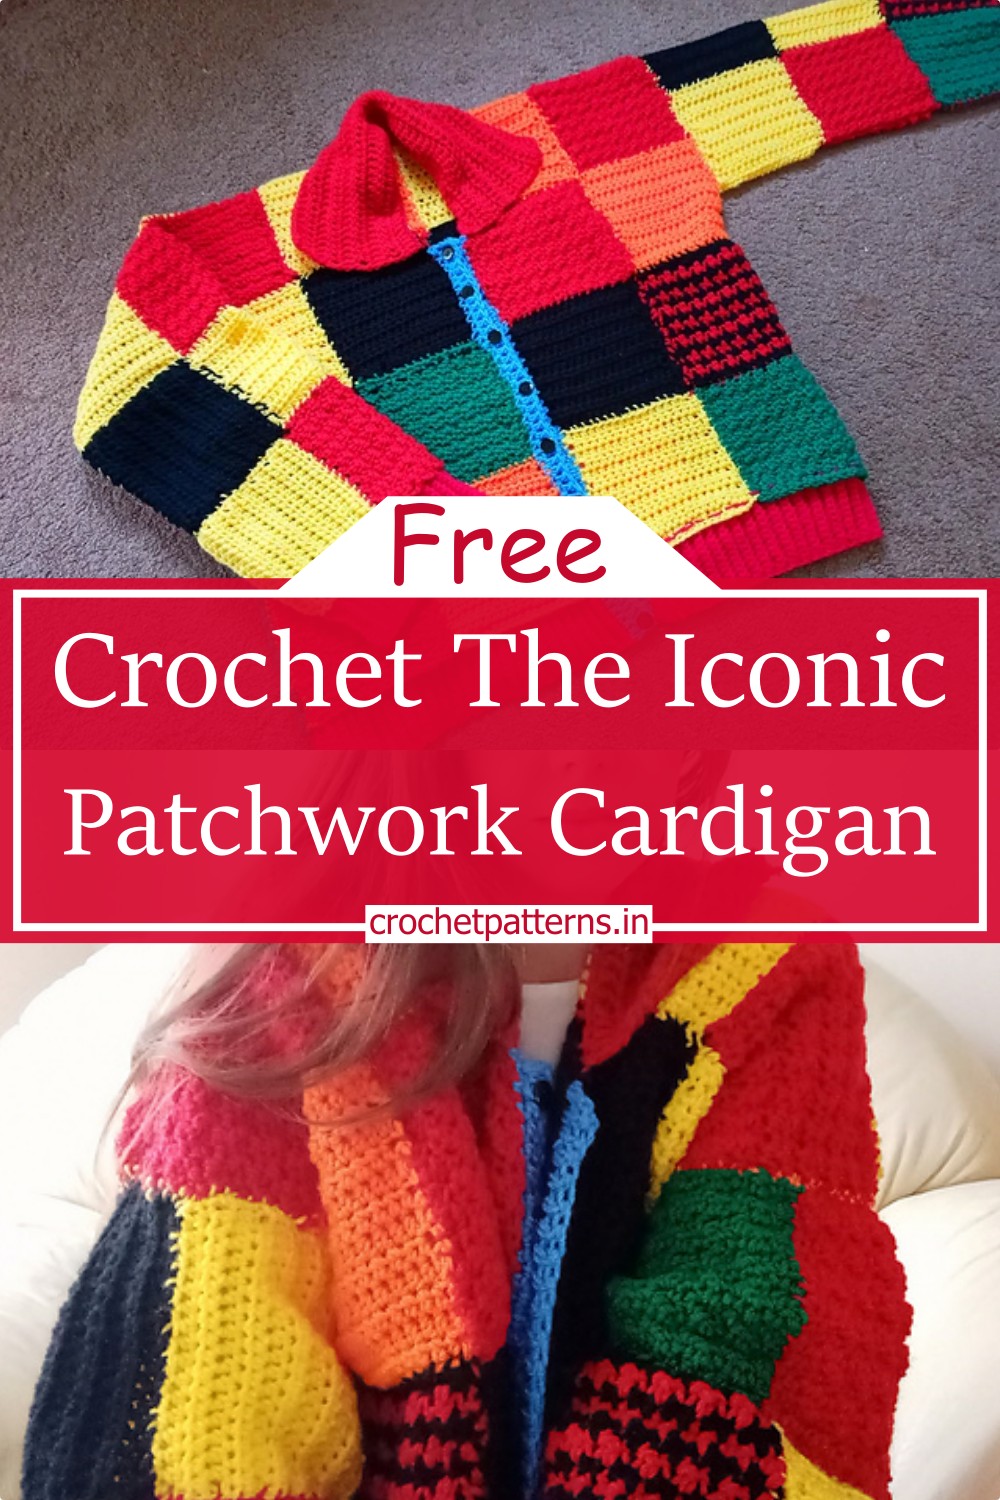 Crochet The Iconic Patchwork Cardigan